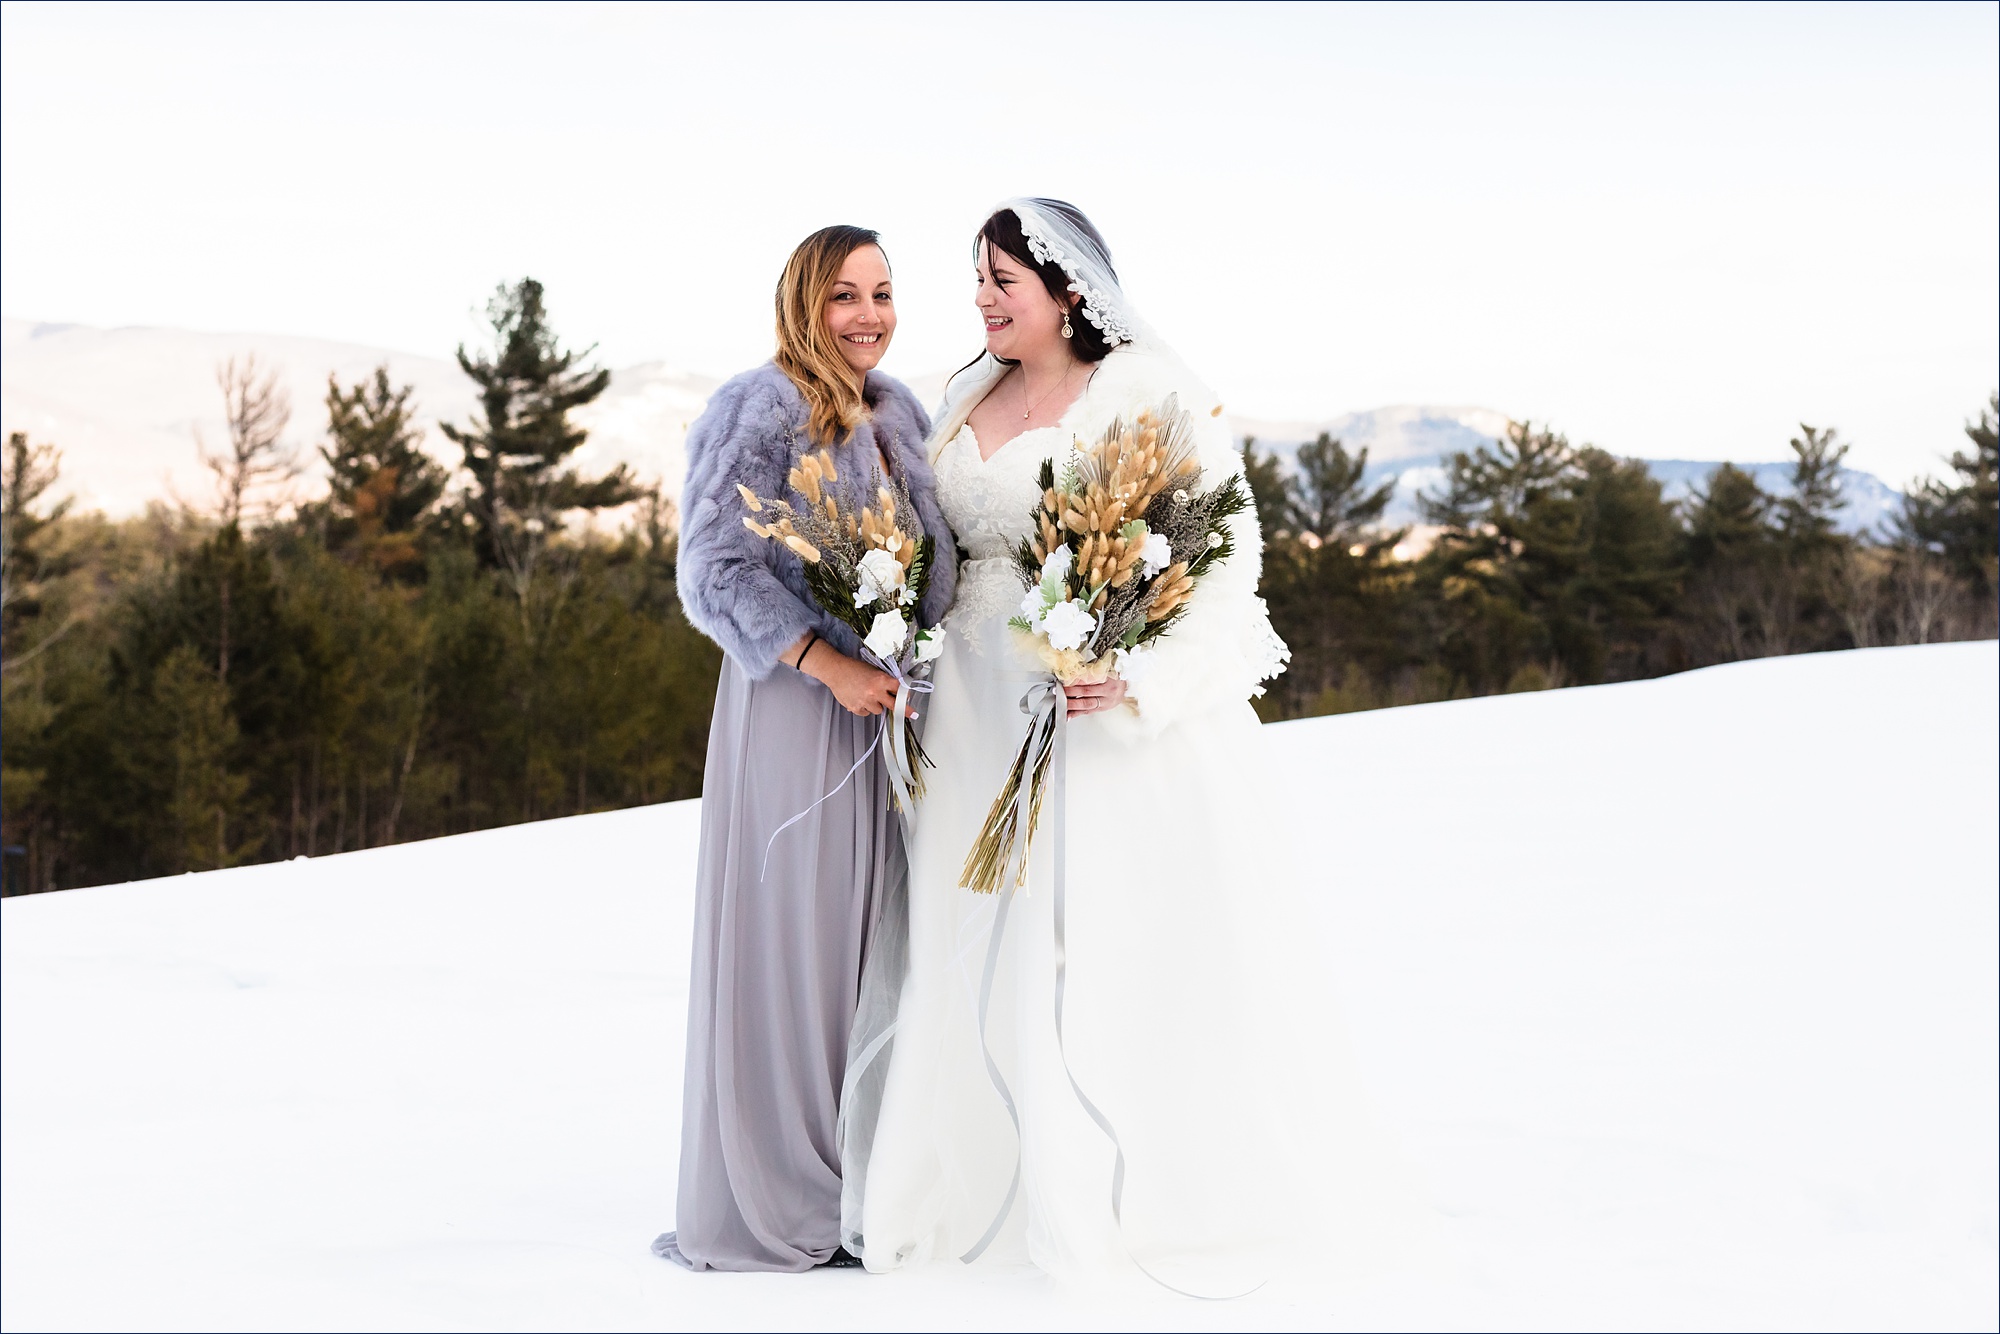 The bride smiles at her sister on her NH elopement day in the White Mountains